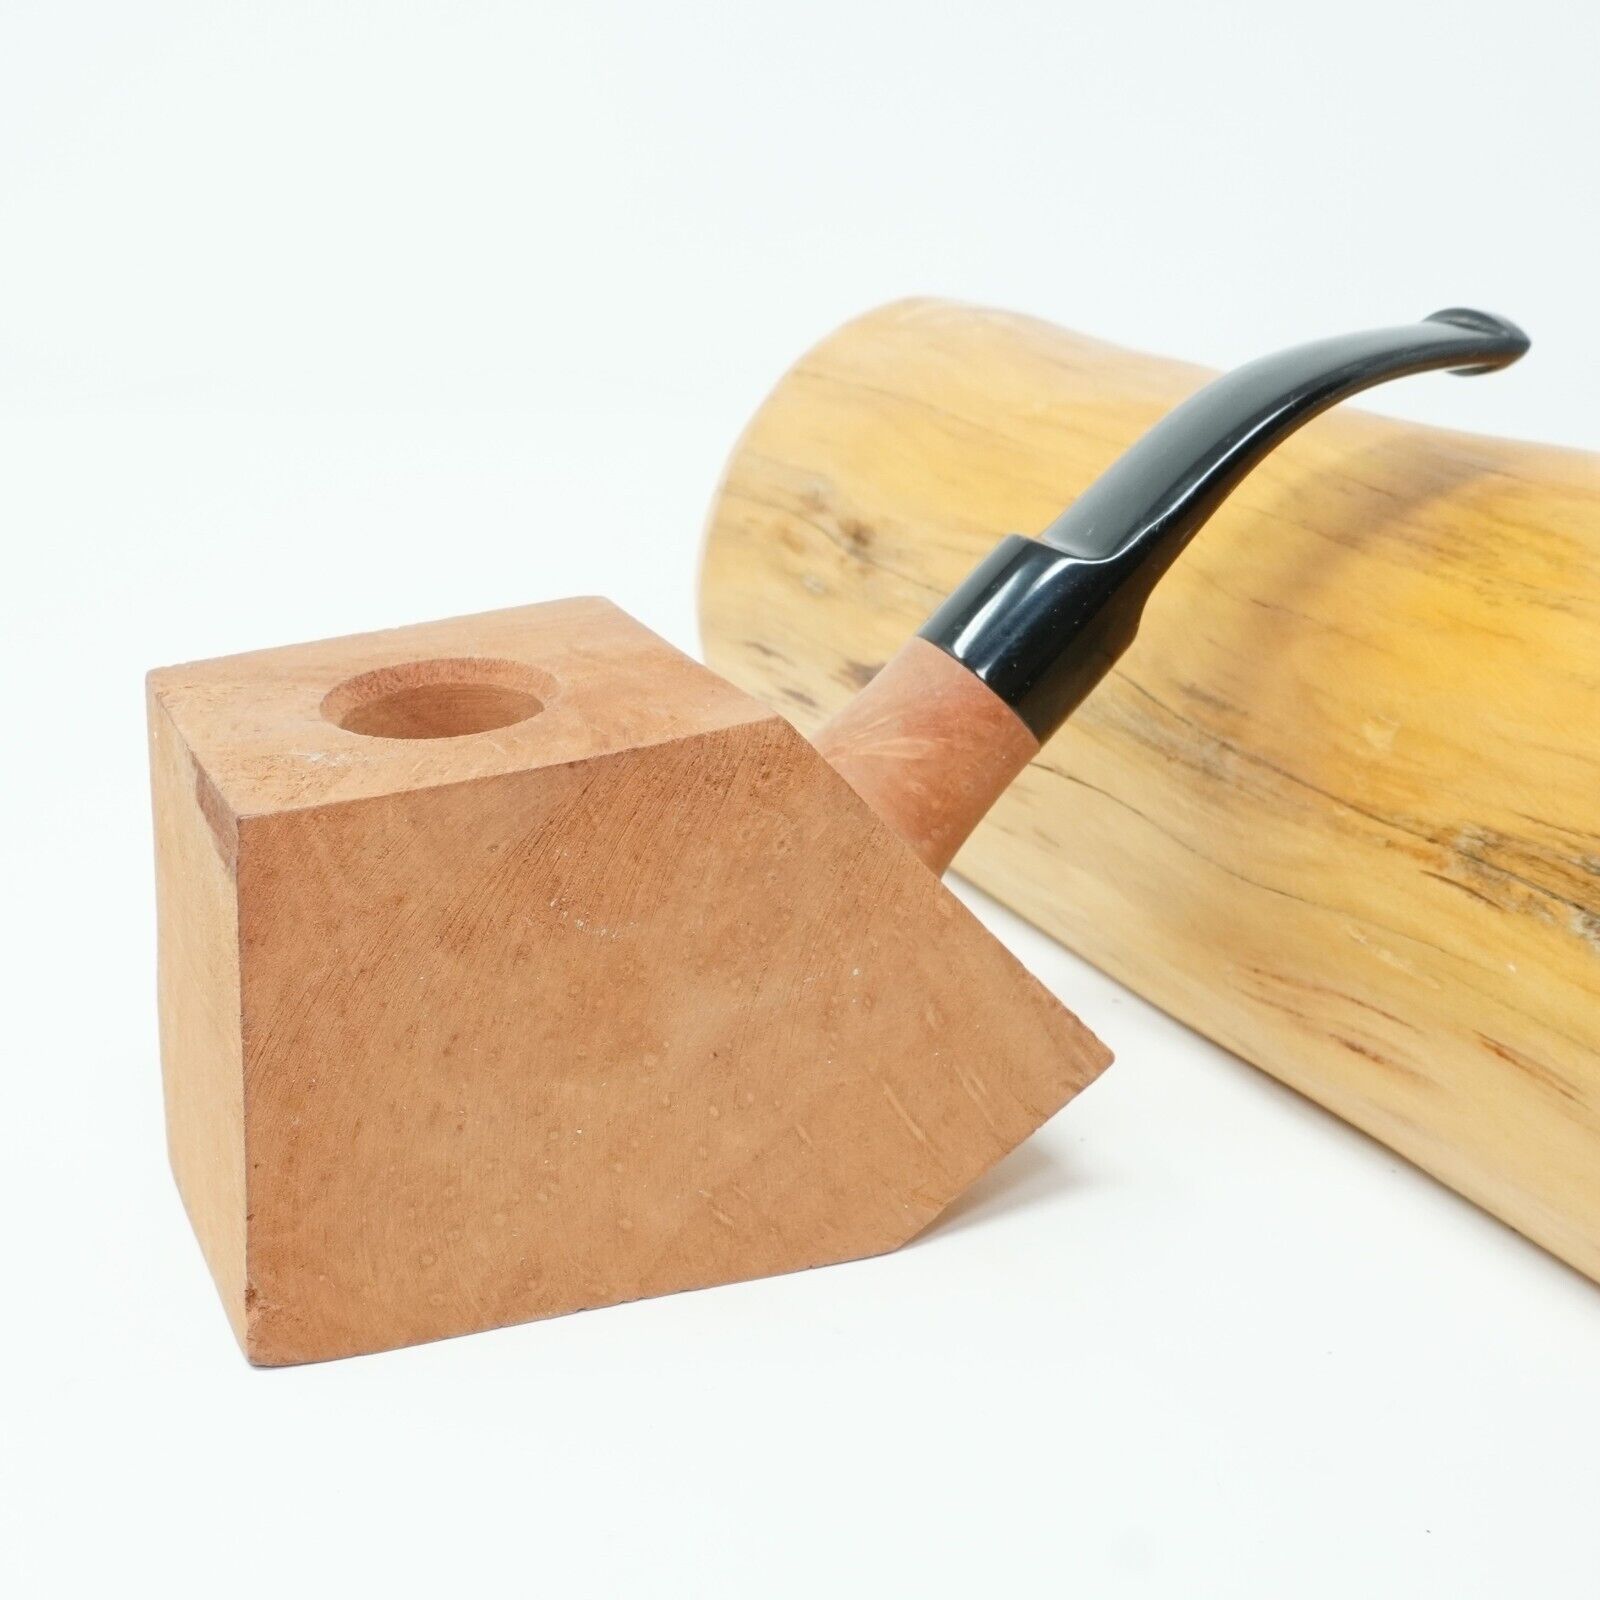 Jumbo Clean and Unsmoked BRIAR BLOCK PRE-DRILLED PIPE w/ STEM Uncarved